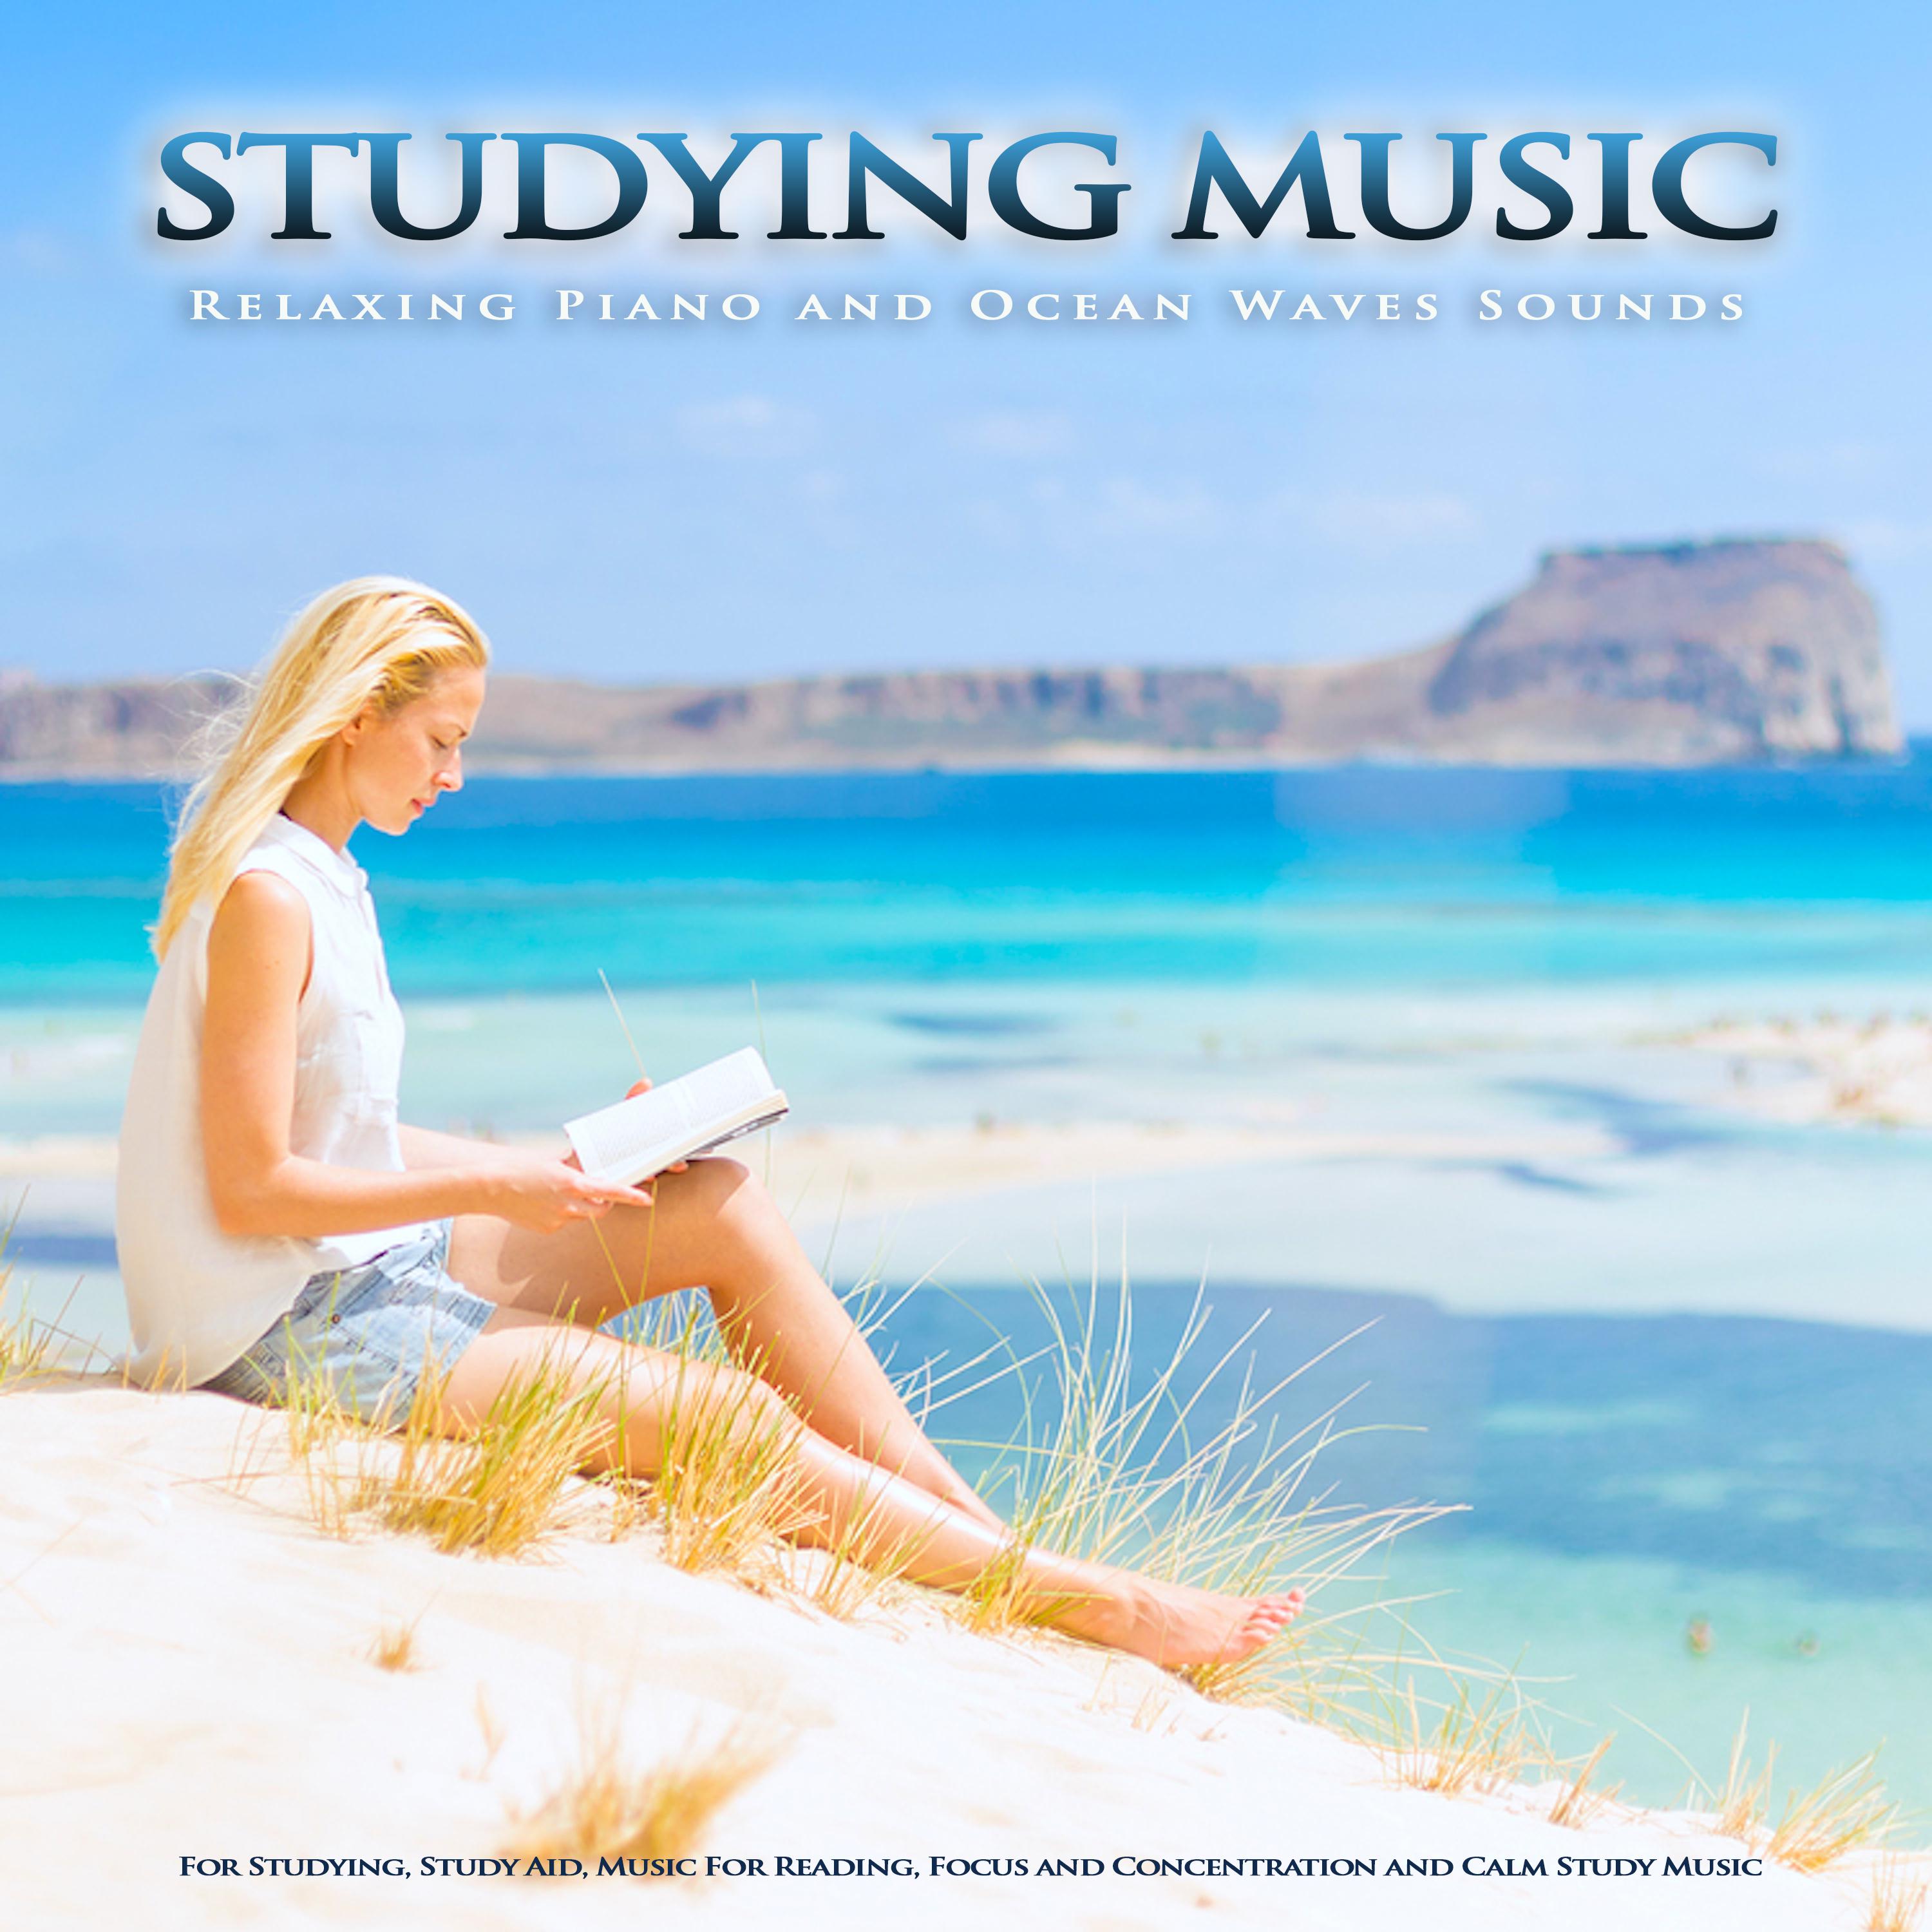 Studying Music: Relaxing Piano and Ocean Waves Sounds For Studying, Study Aid, Music For Reading, Focus and Concentration and Calm Study Music